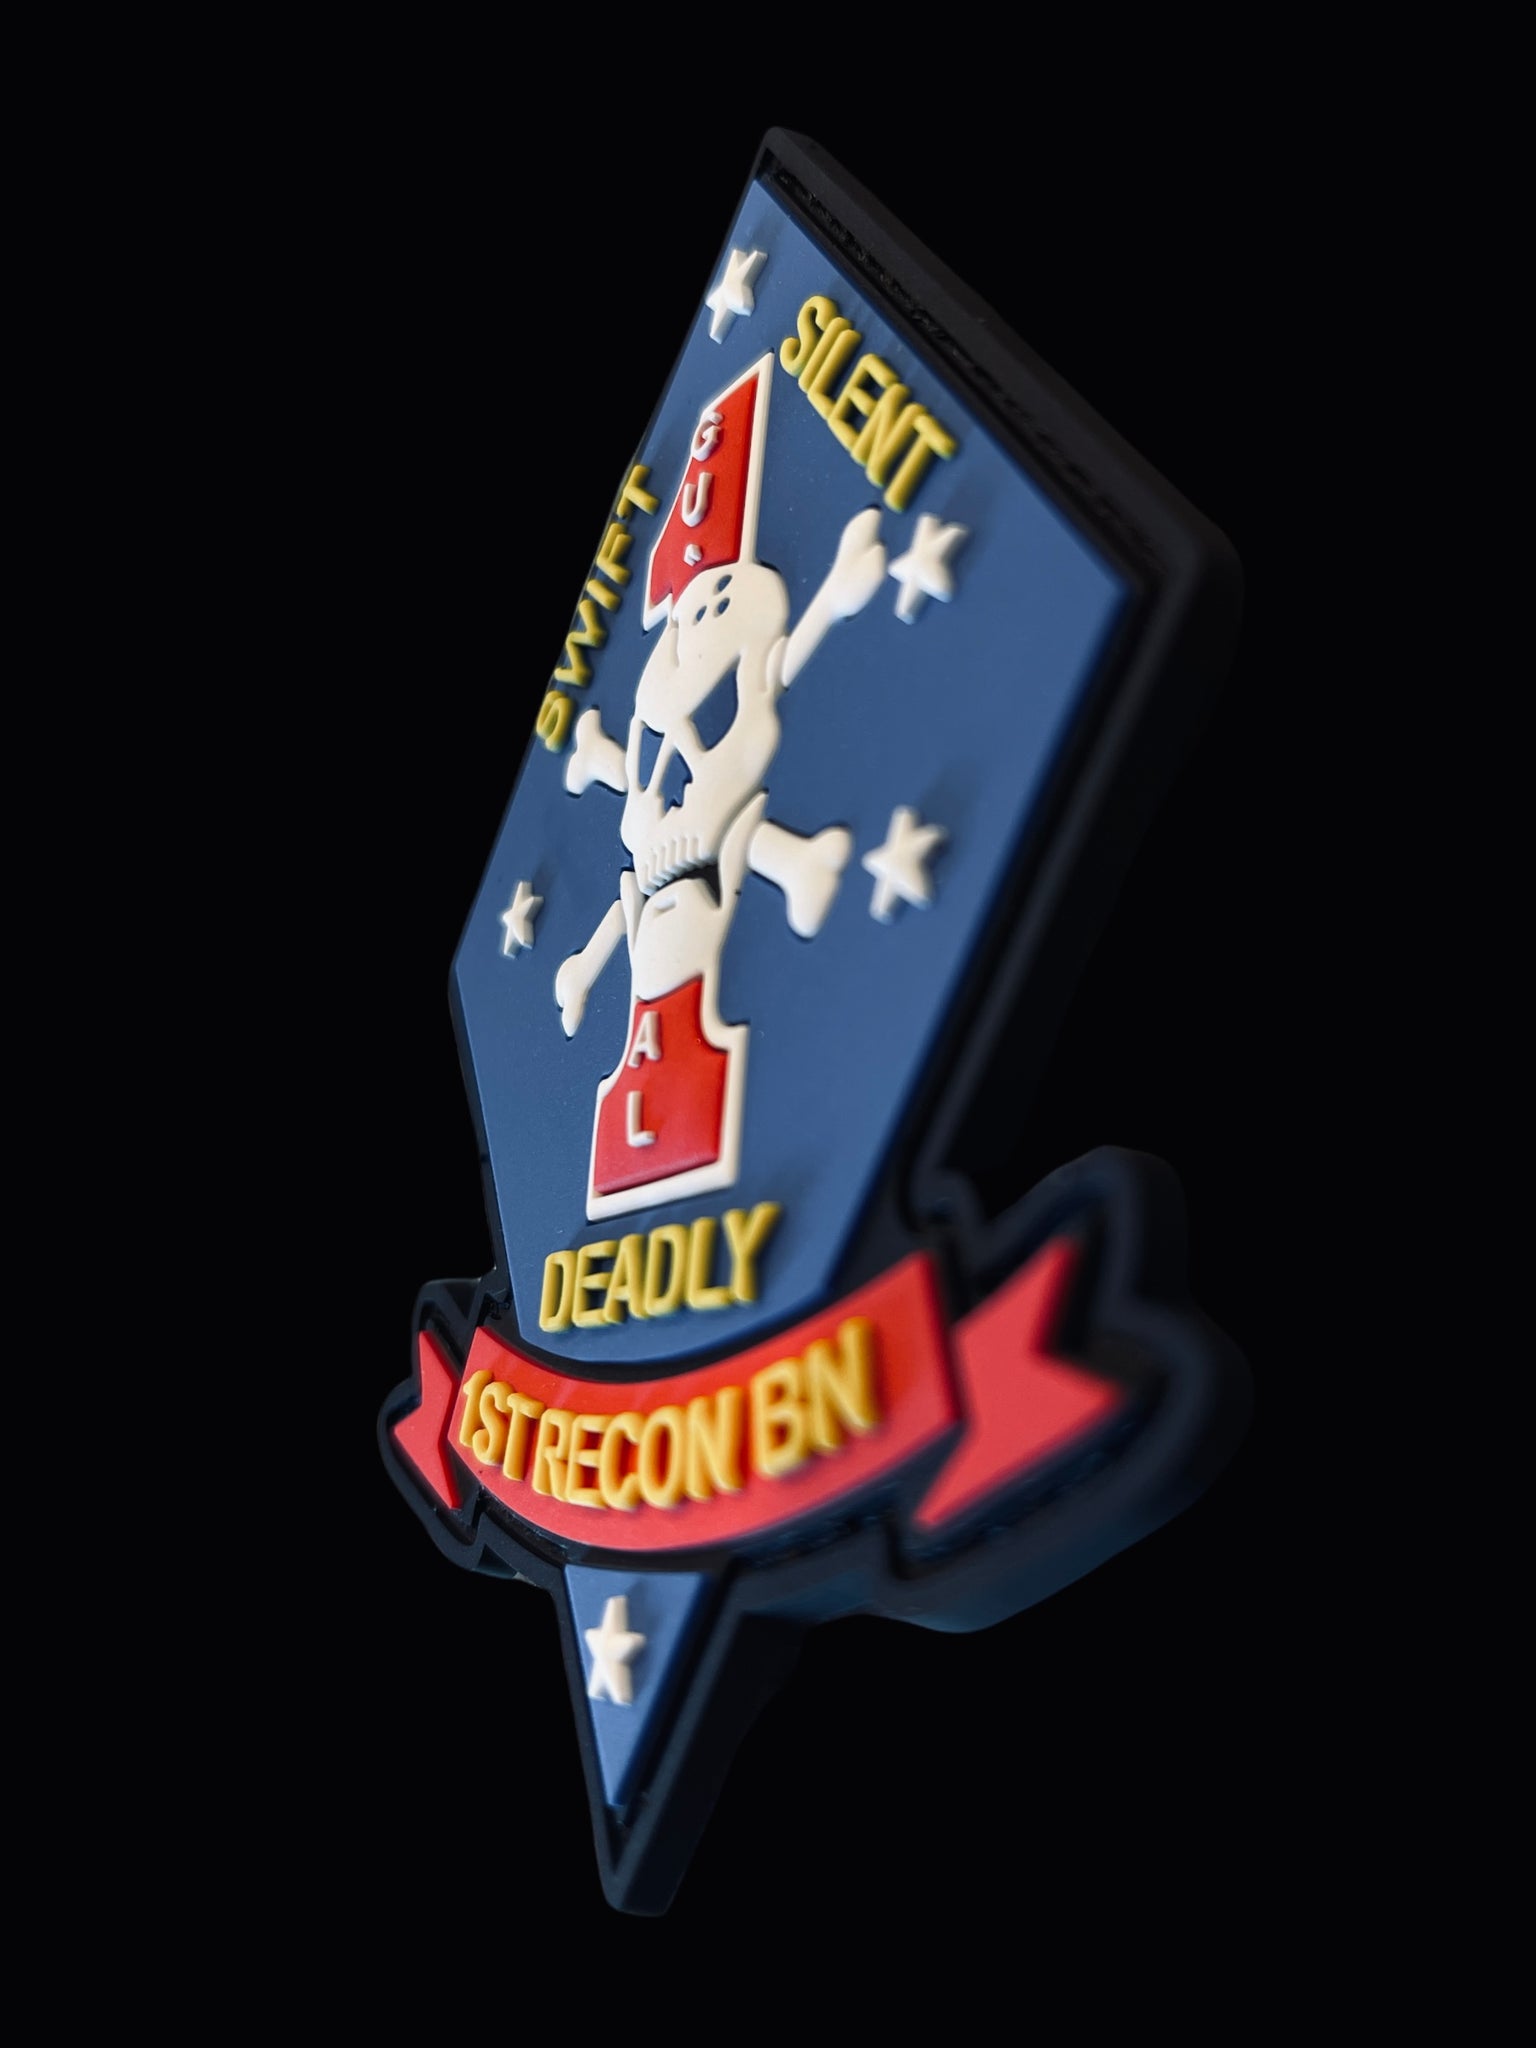 HHC 1-128 IN BN Voodoo Medic Patch  Headquarters and Headquarters Company  1st Battalion, 128th Infantry Battalion Patches